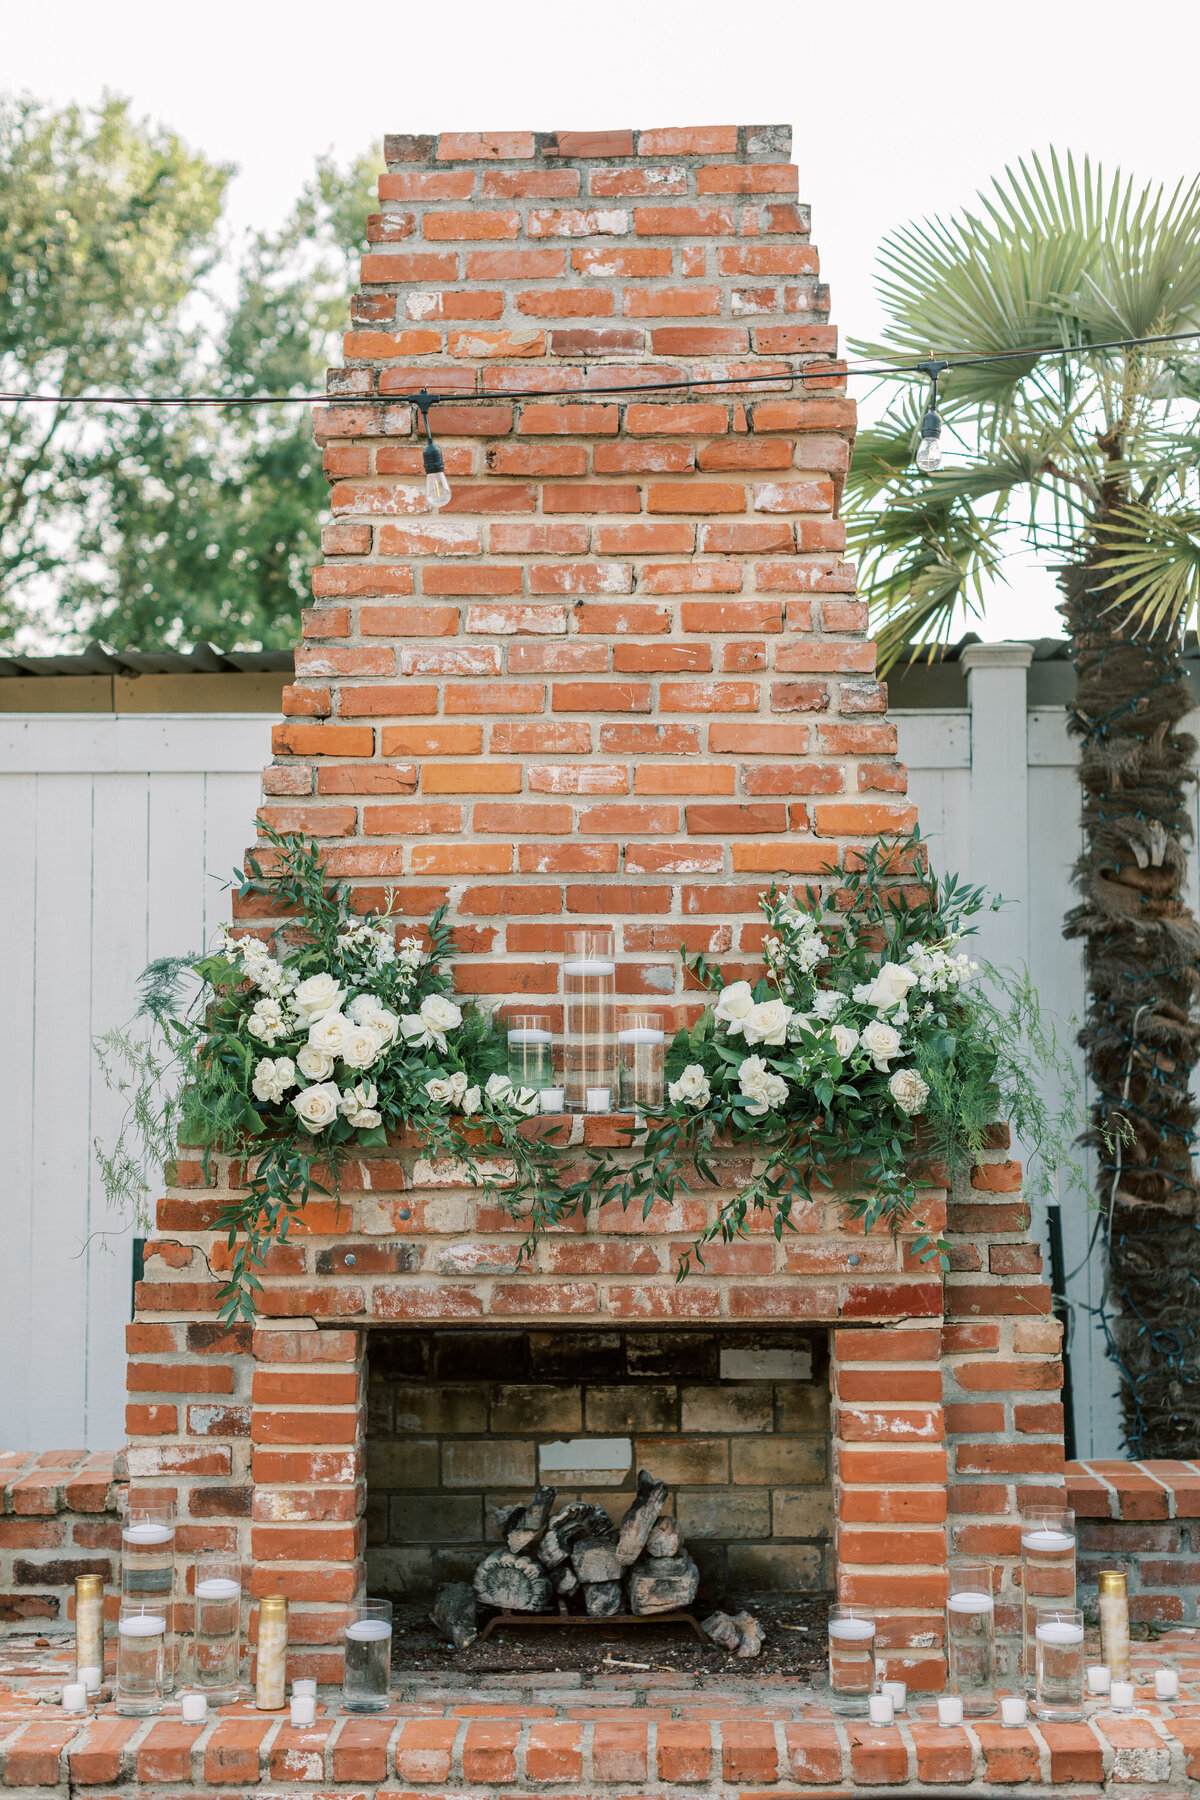 White and green florals decorate the brick fireplace.